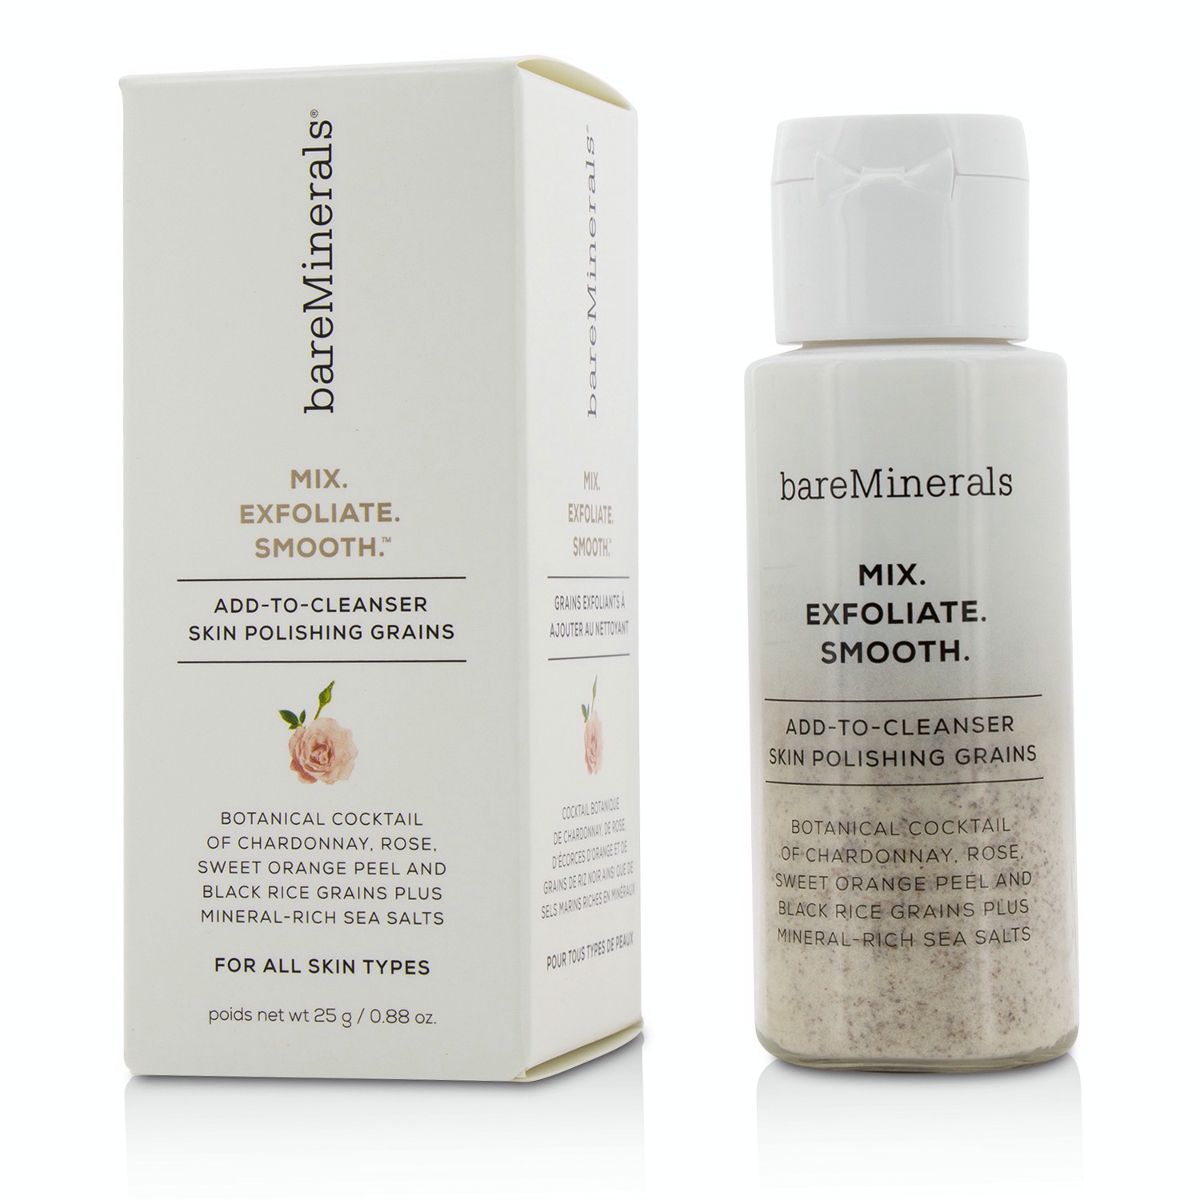 Mix. Exfoliate. Smooth. Add-To-Cleanser Skin Polishing Grains BareMinerals Image